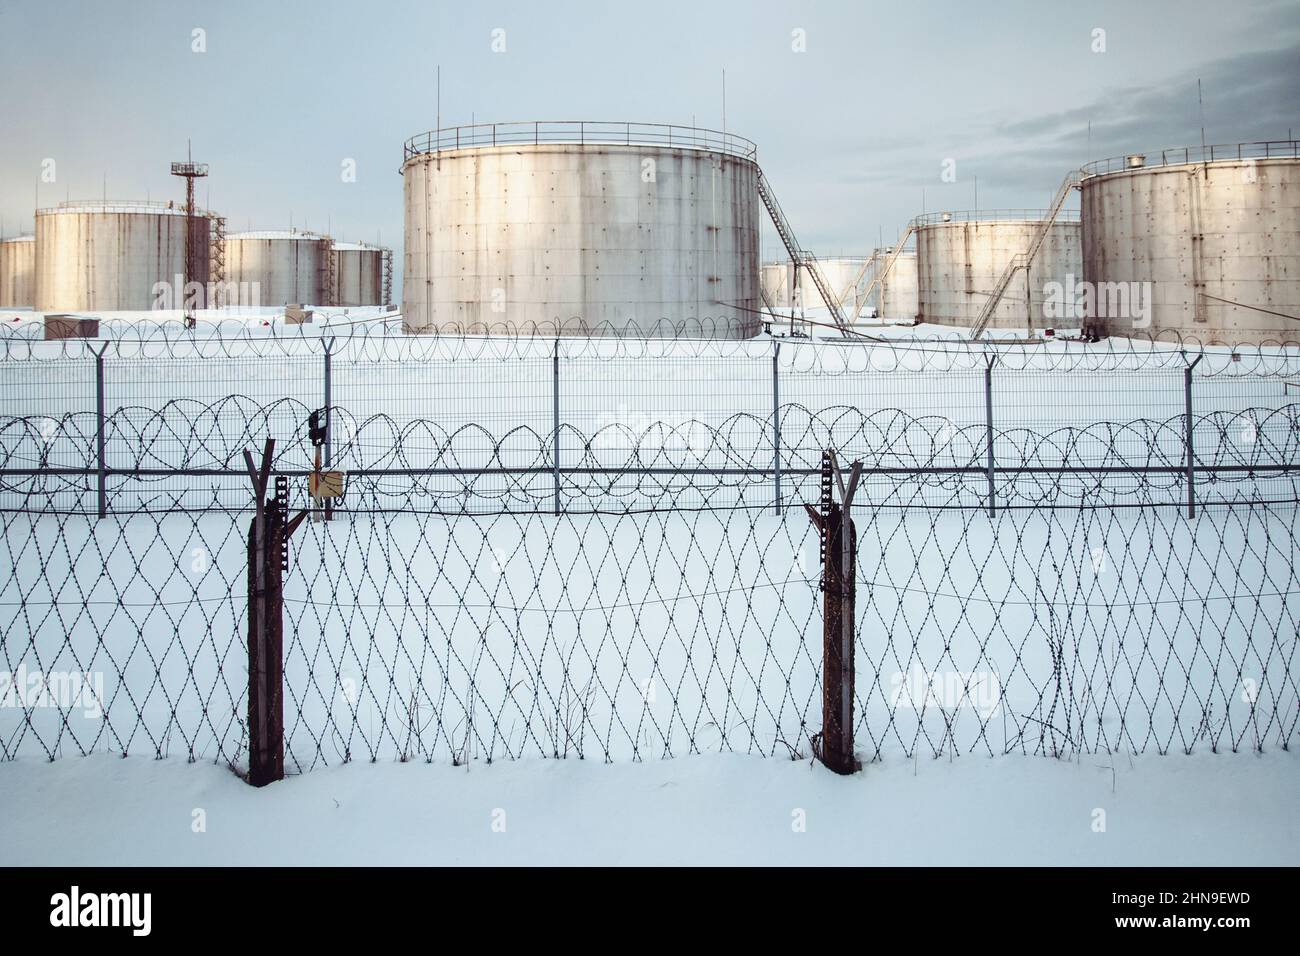 Tank farm of oil storage terminal secured with fence, winter view, snow Stock Photo